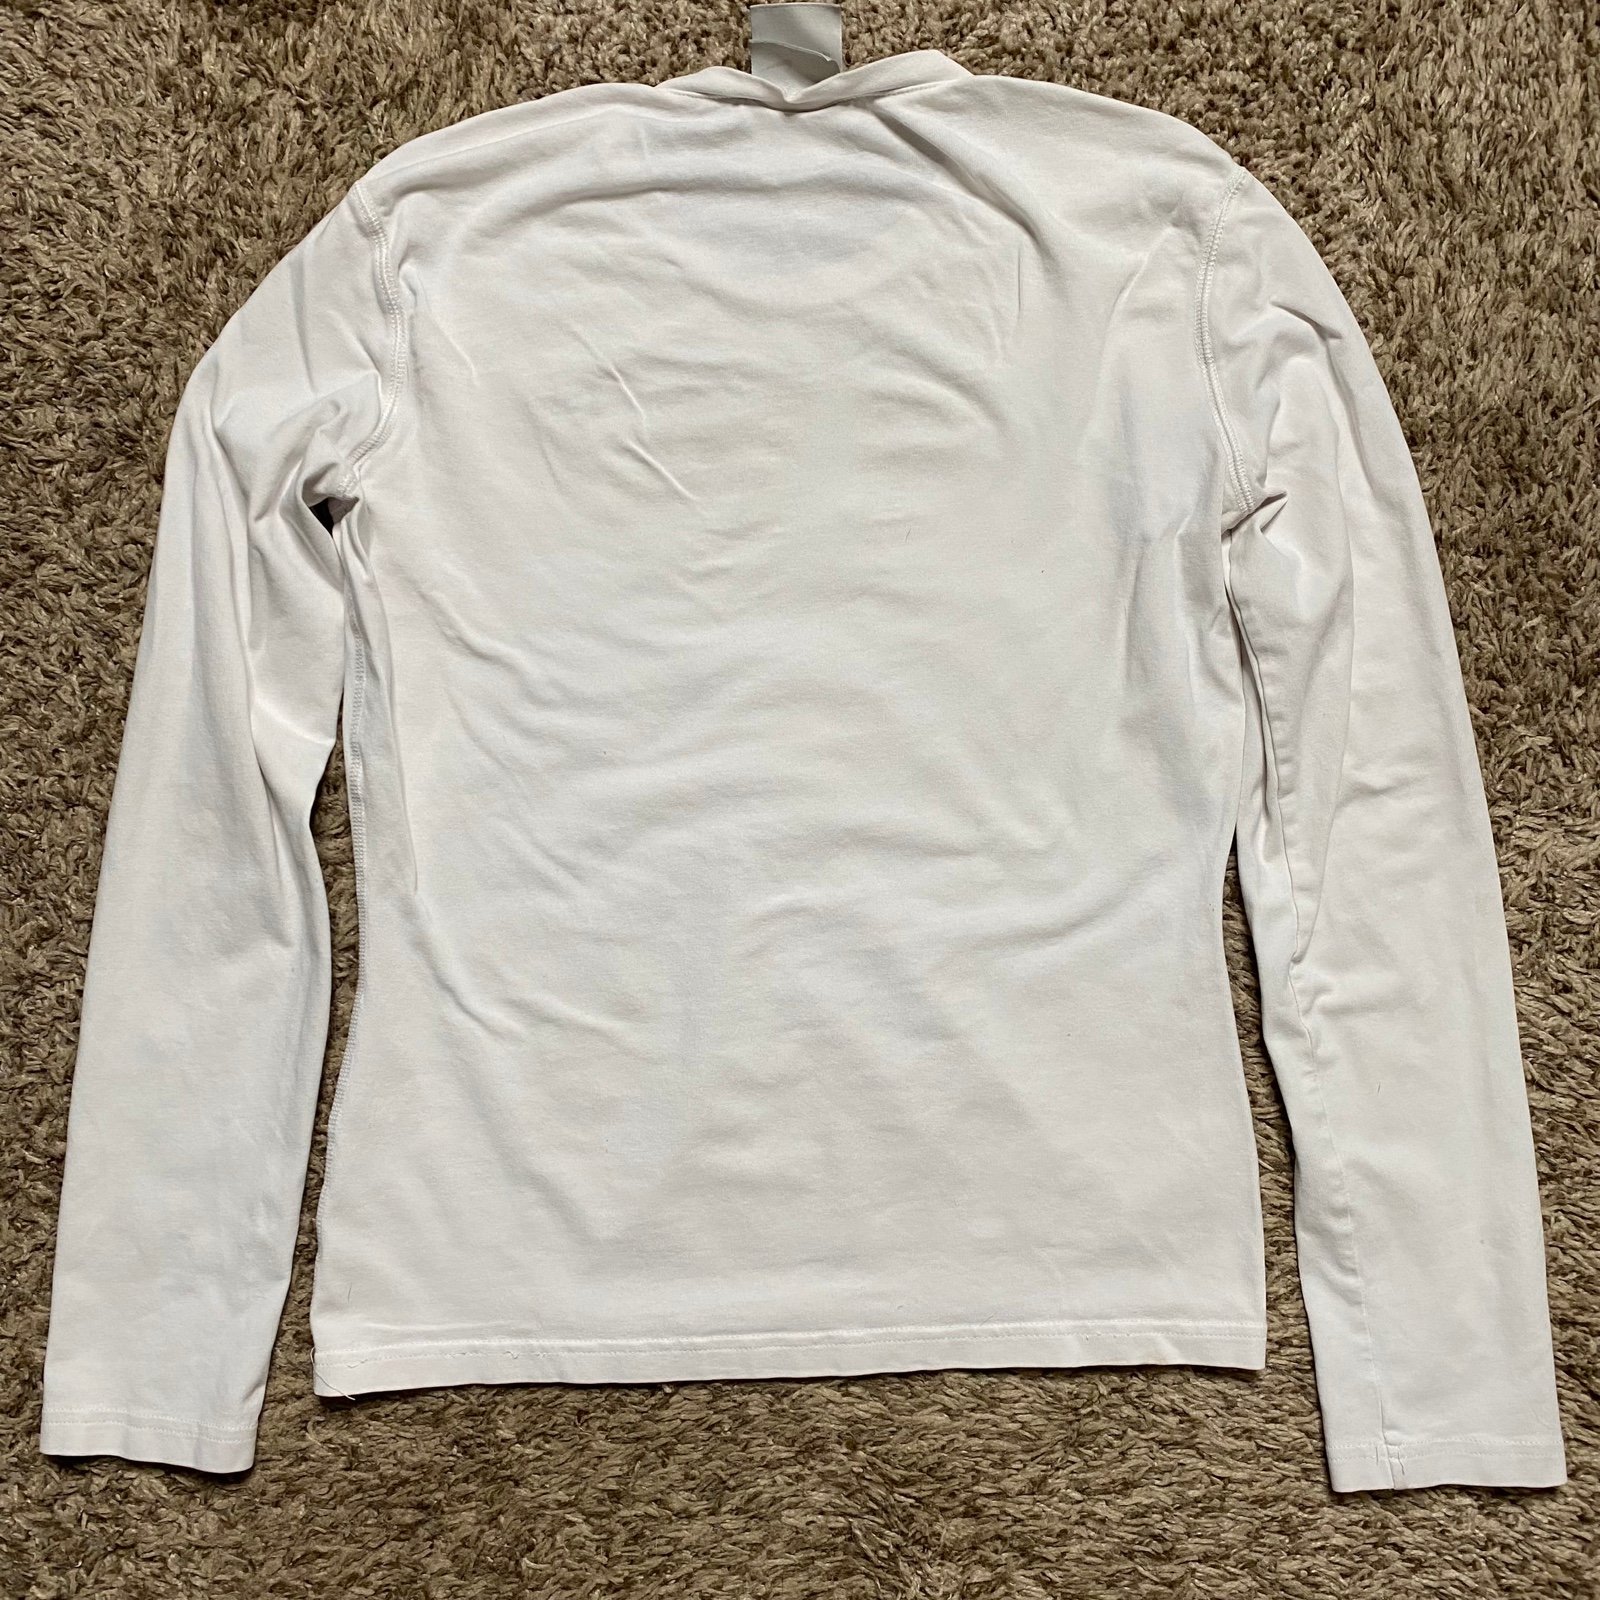 save up to 70% Vintage nike long sleeve lA1eubBhR Cool